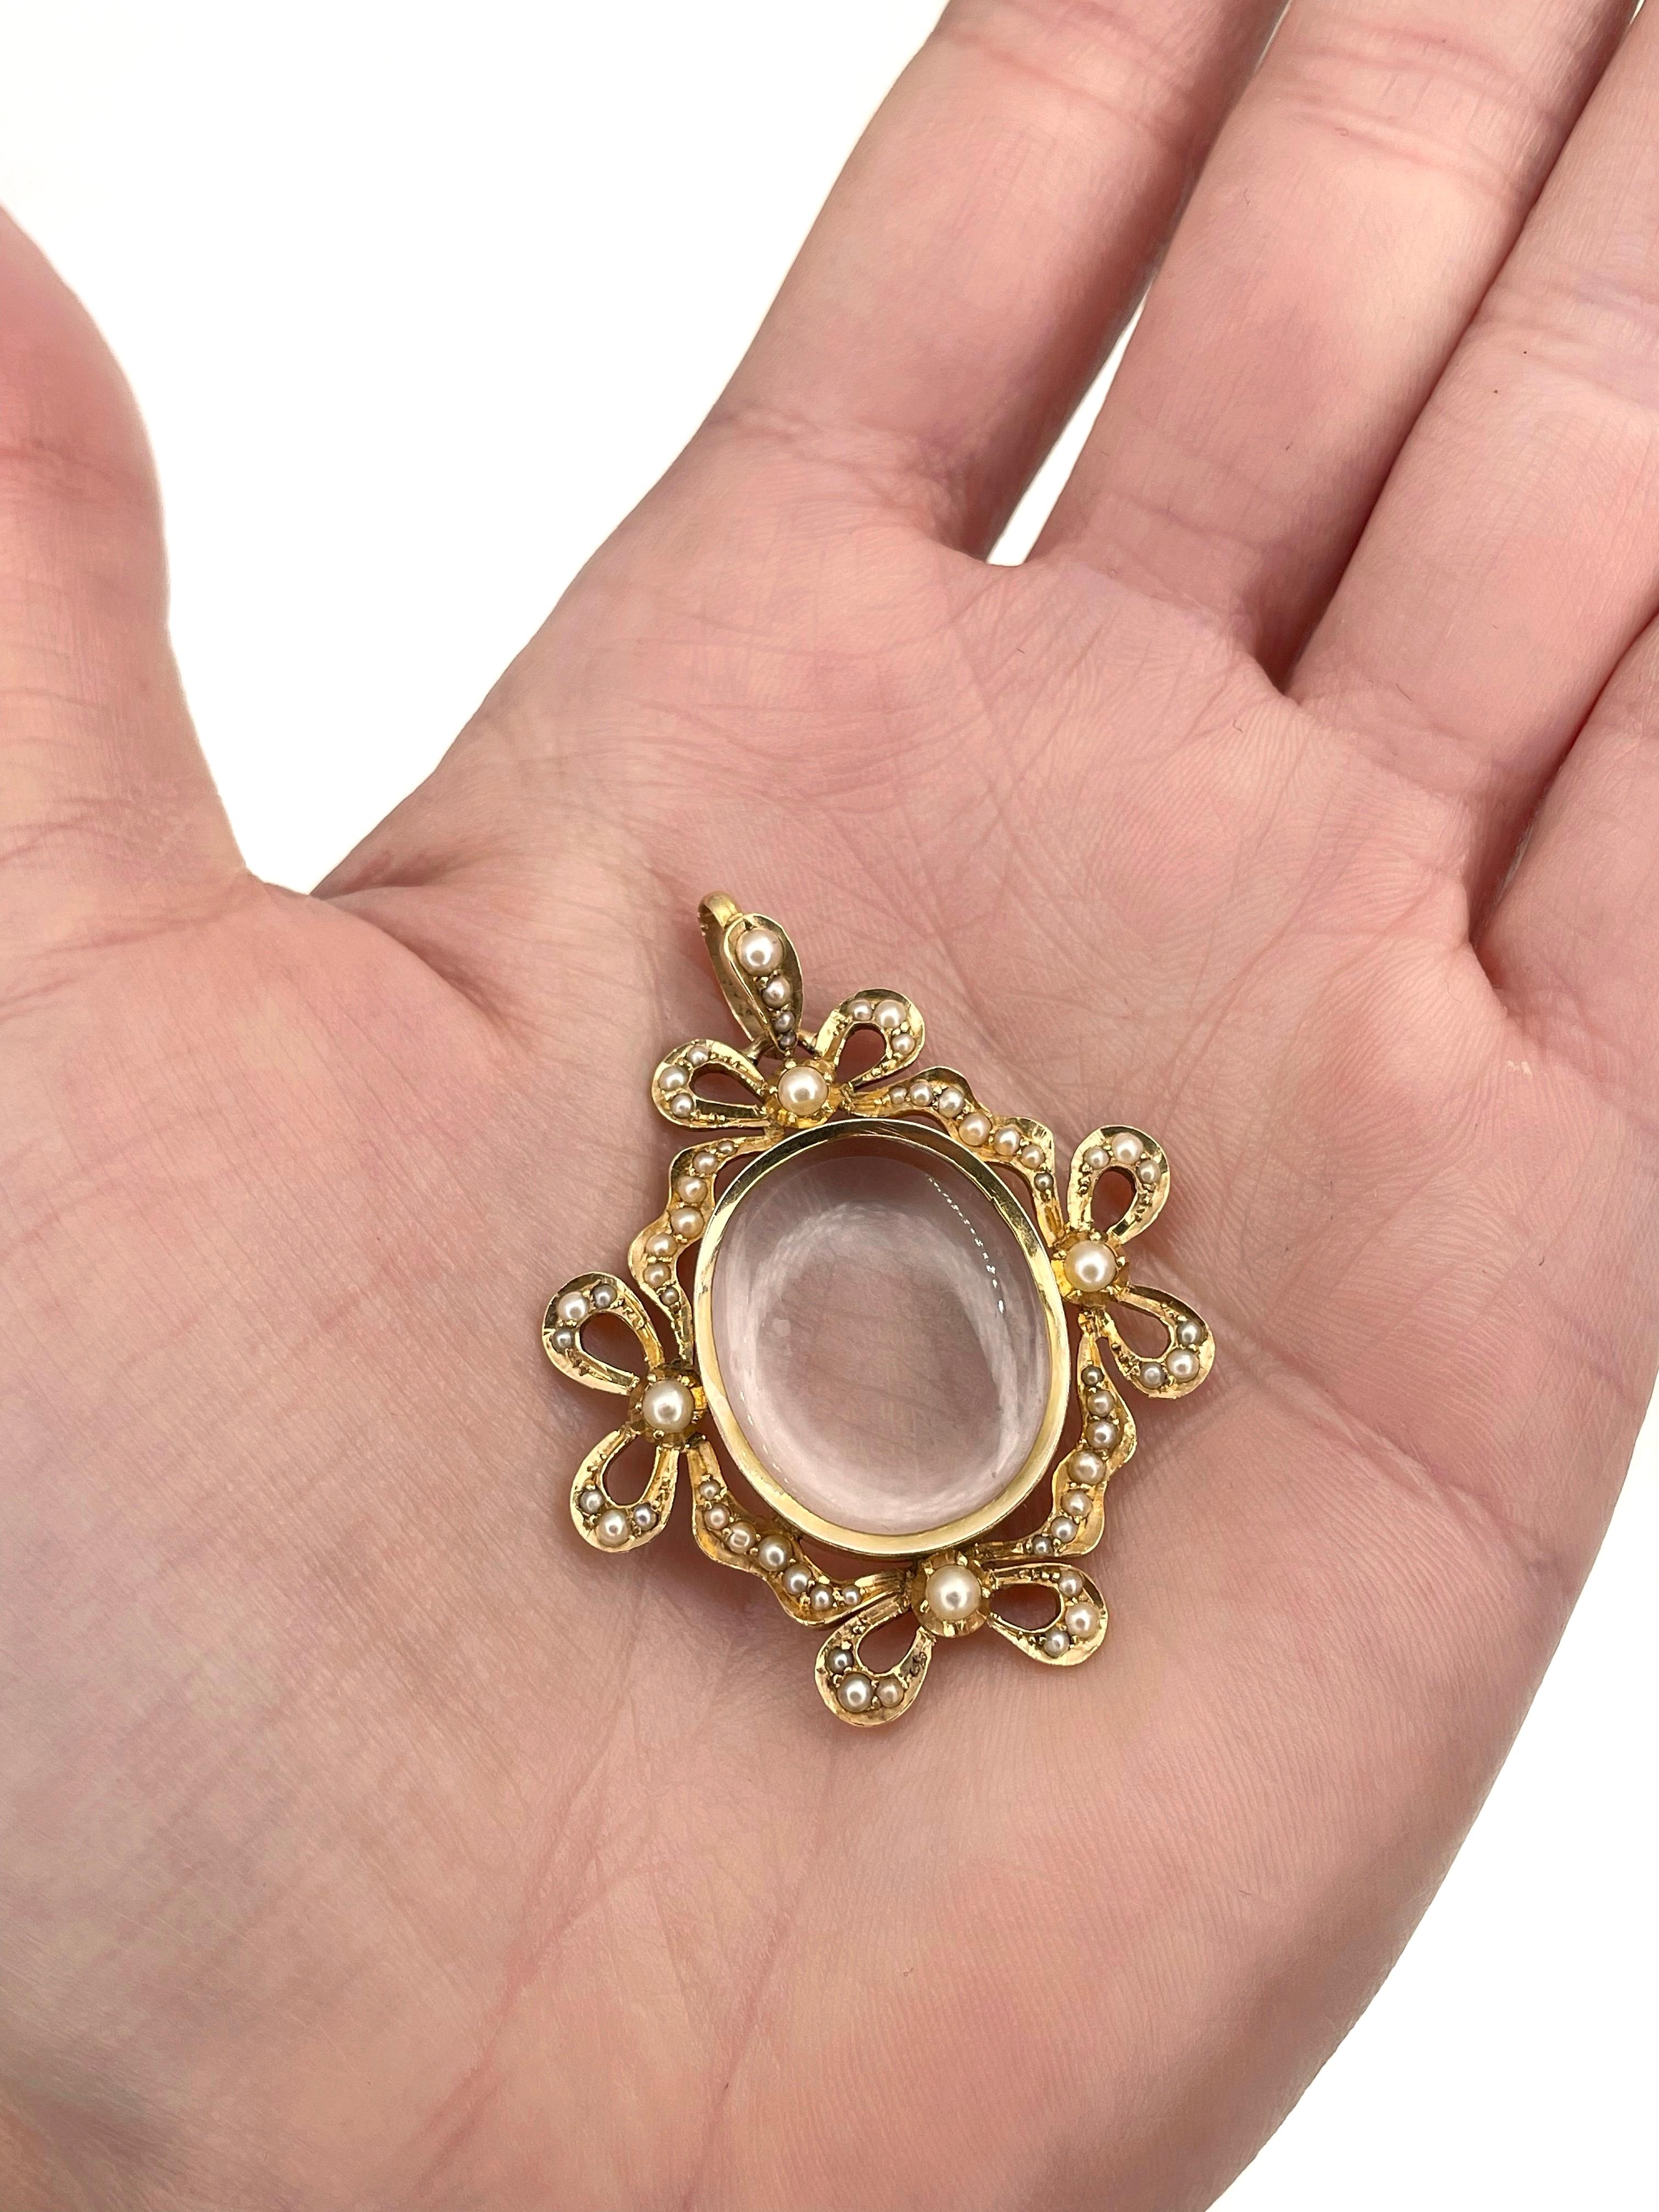 This is an amazing Edwardian clear locket pendant crafted in 14K yellow gold. The piece features 59 seed pearls. It has a transparent space for pictures or gems to put inside (shown in video). 

Weight: 10.45g
Size: 4.2x3.5cm

———

If you have any